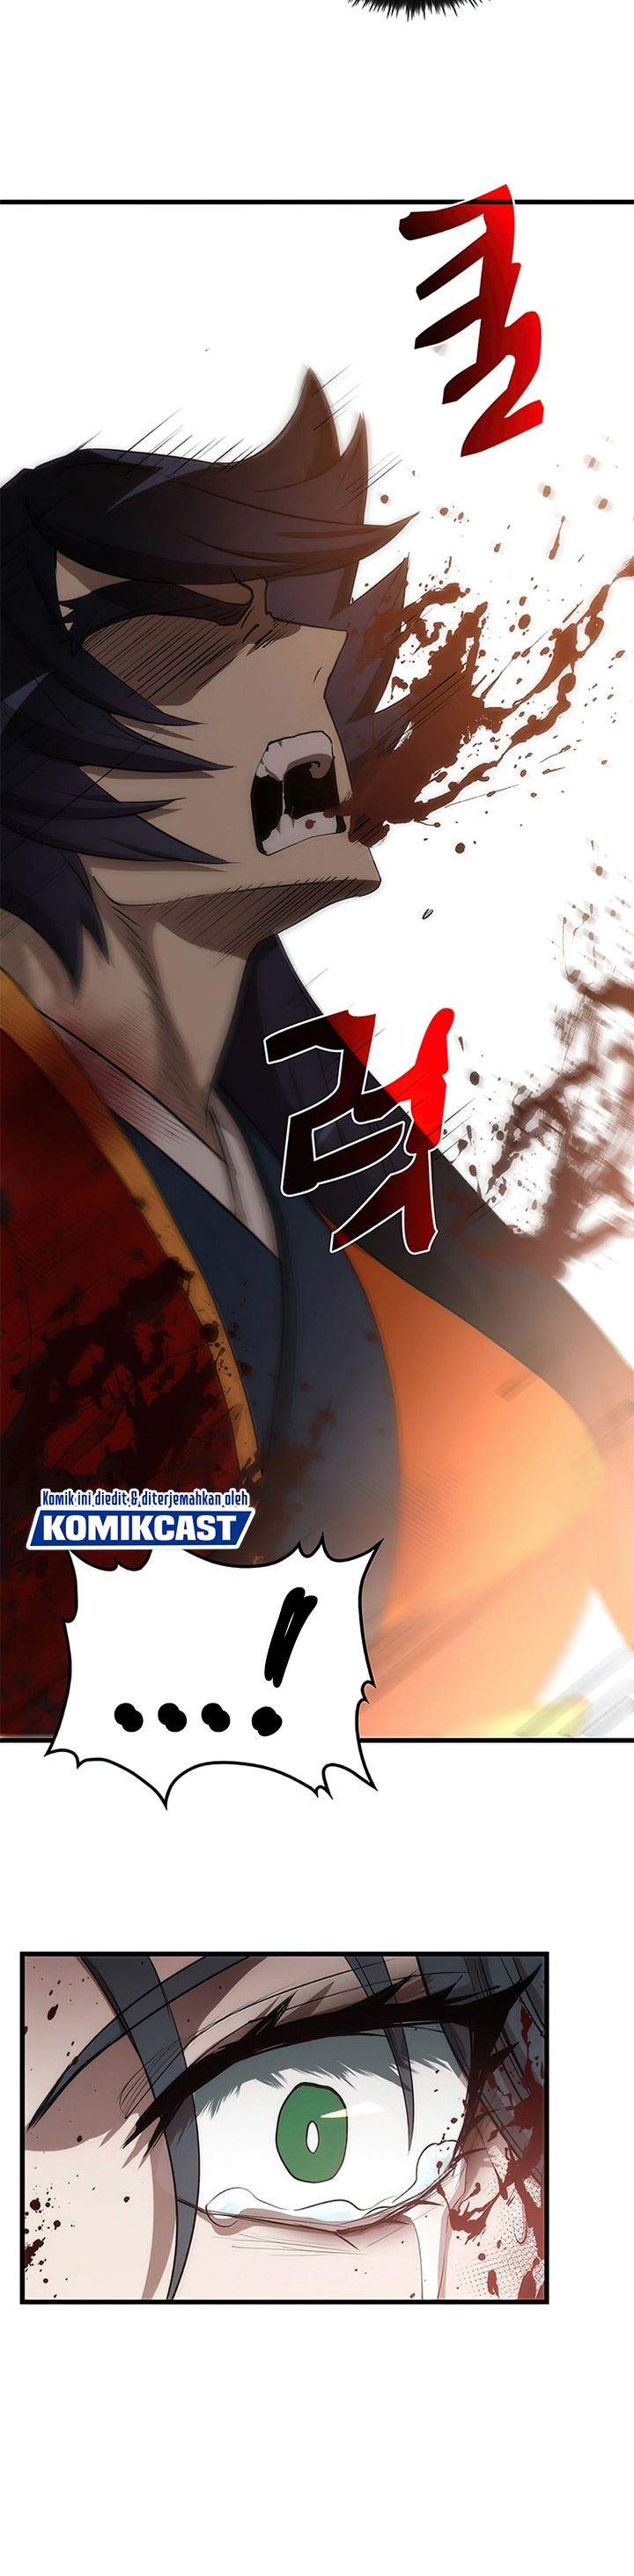 Doctor’s Rebirth Chapter 52